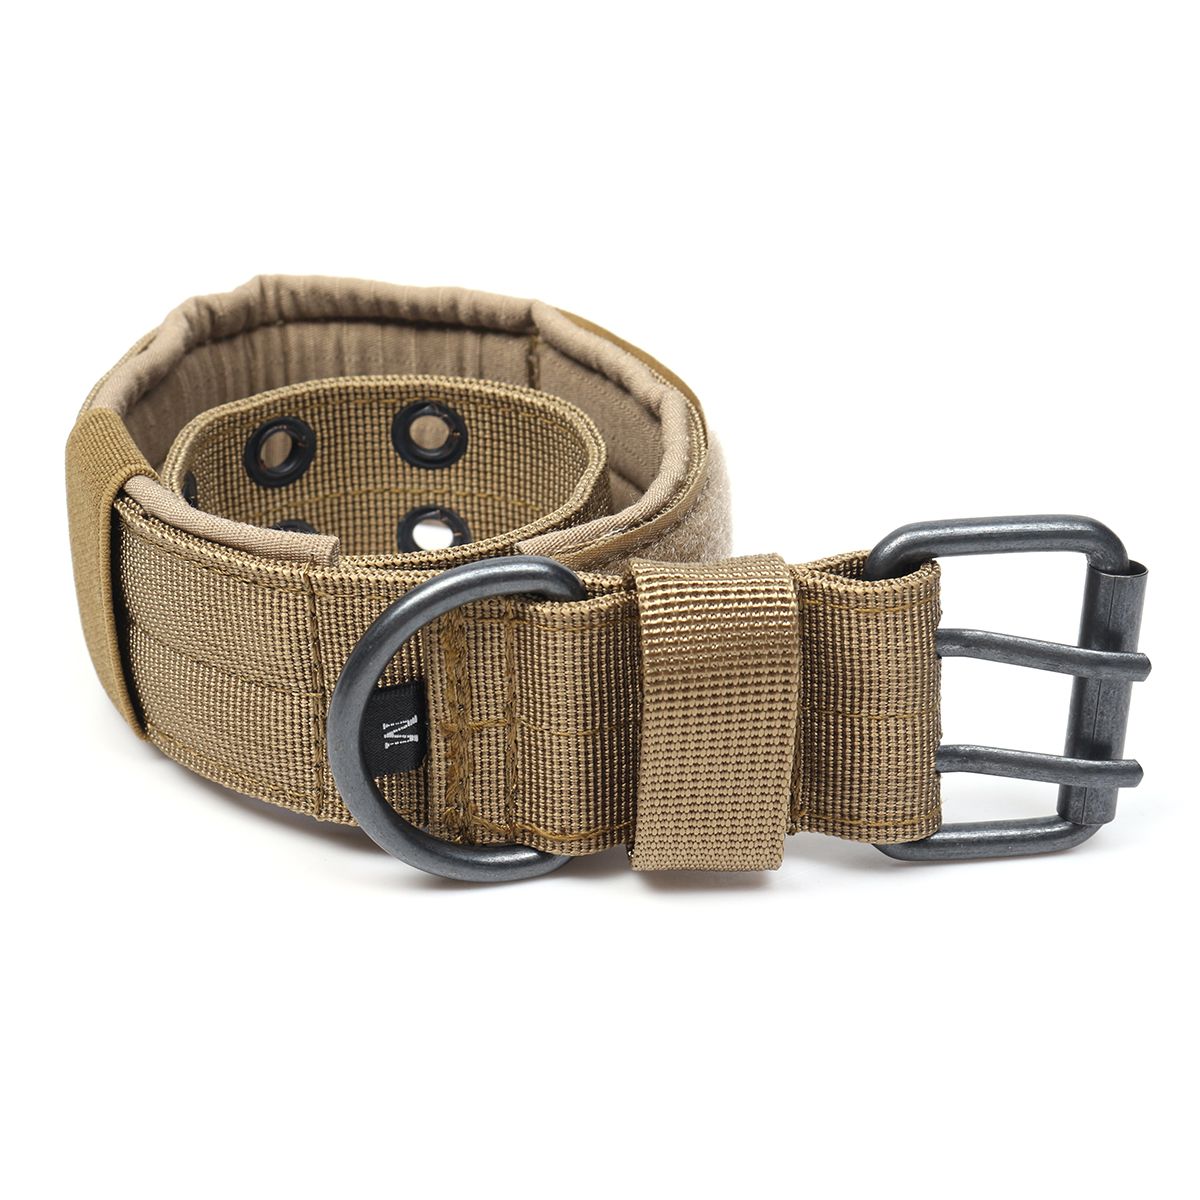 Adjustable-Training-Dog-Collar-Nylon-Tactical-Dog-Collar-Military-With-Metal-D-Ring-Buckle-1366535